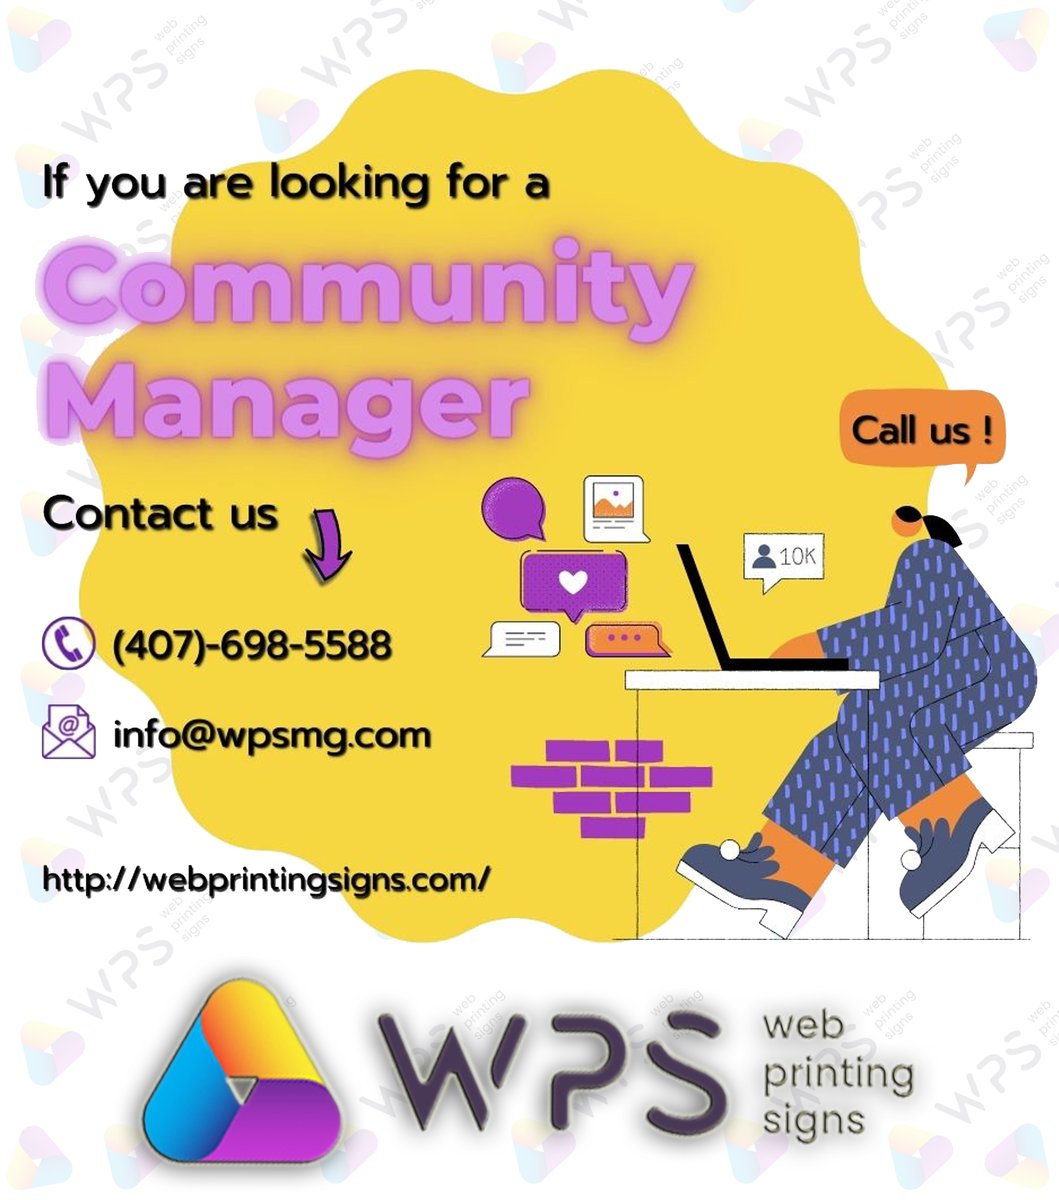 #webprintingsign will be your community manager with prices from US$100 👇

Contact us at +1 407-698-5588. or visit our gig at #Fiverr 👇

business.fiverr.com/share/oYYjq4

#marketing #communitymanager #communitymanagement #facebookmanager #instagrammanager #Twitter #fiverrgig